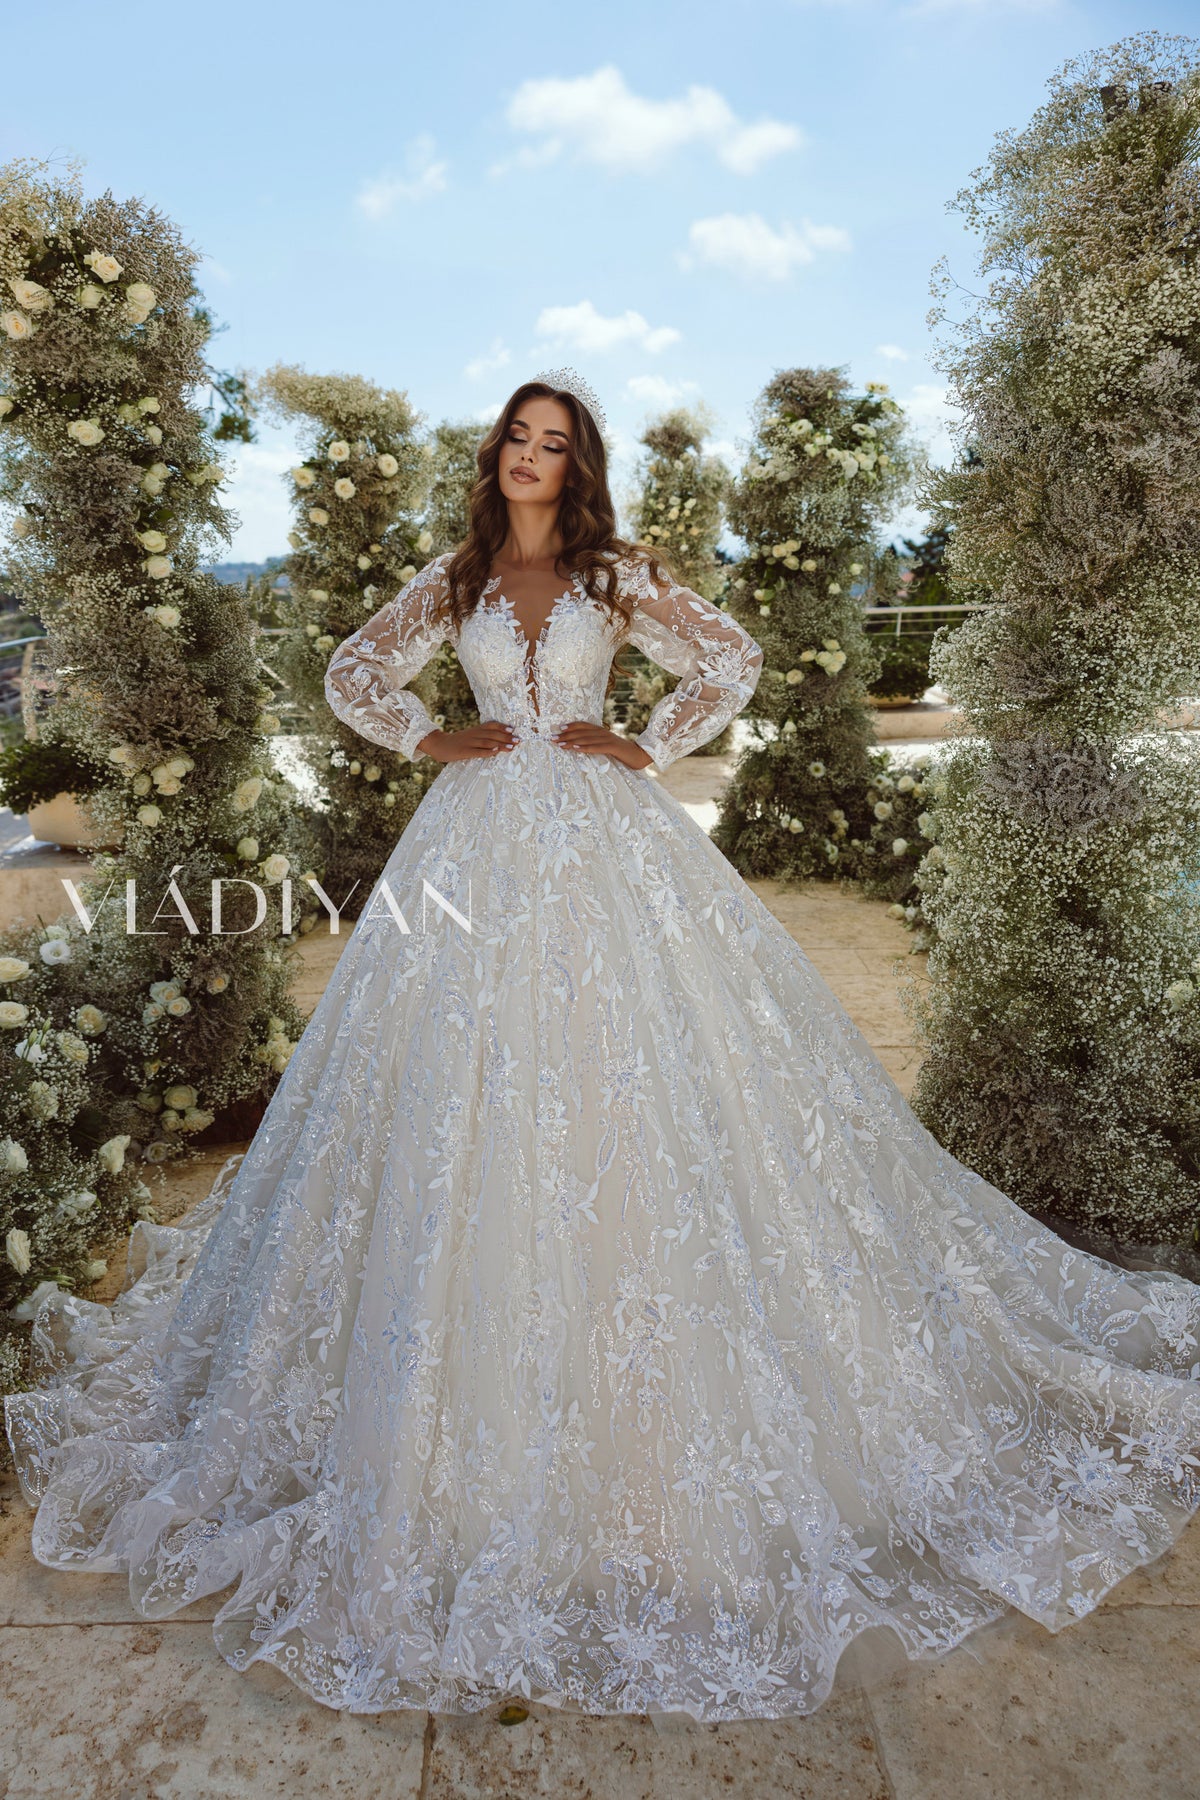 Floral Lace Luxury Princess Queen Long Sleeve Deep V Neckline Wedding Dress Bridal Gown Ball Gown Long Train High Collar Illusion Lace Style